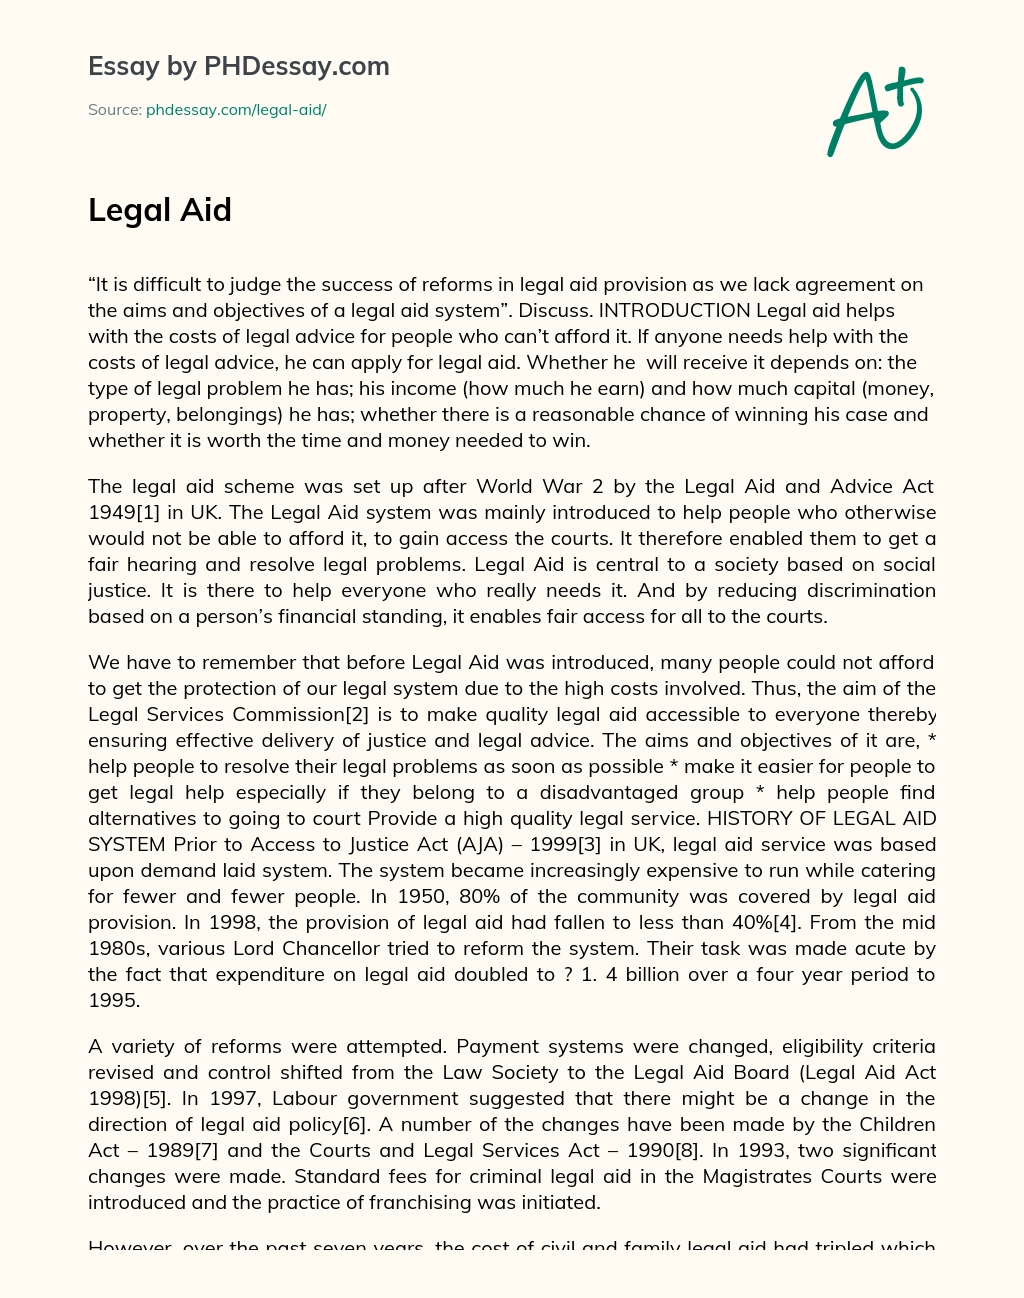 The Lack of Consensus on Aims and Objectives of Legal Aid System Hinders Assessment of Reforms essay